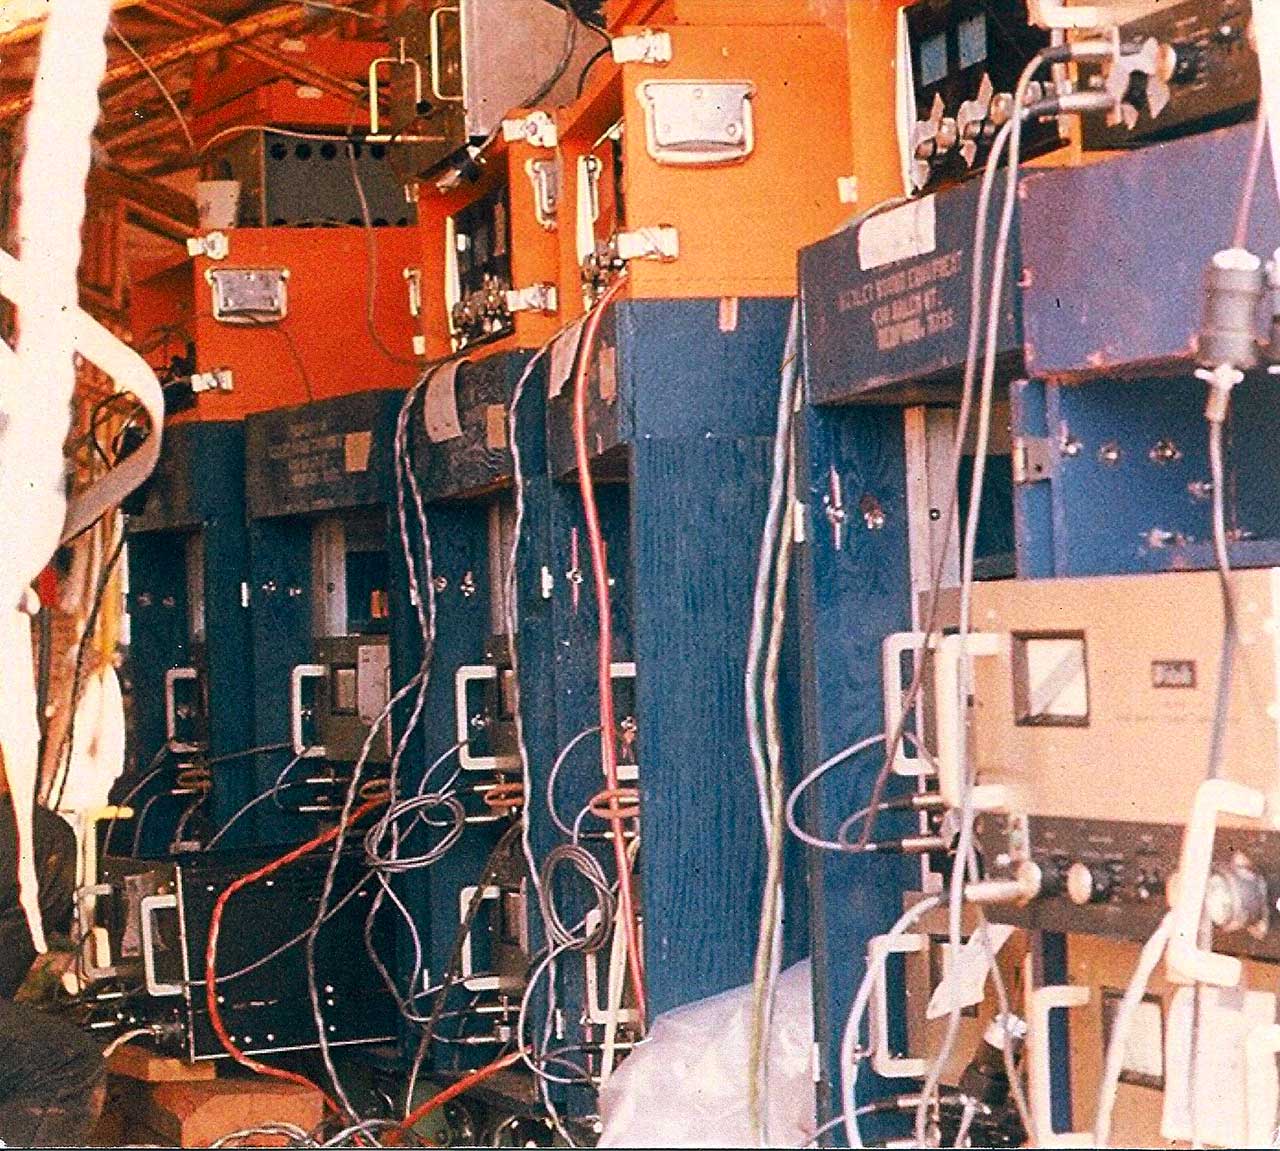 McIntosh amps under the stage at Woodstock